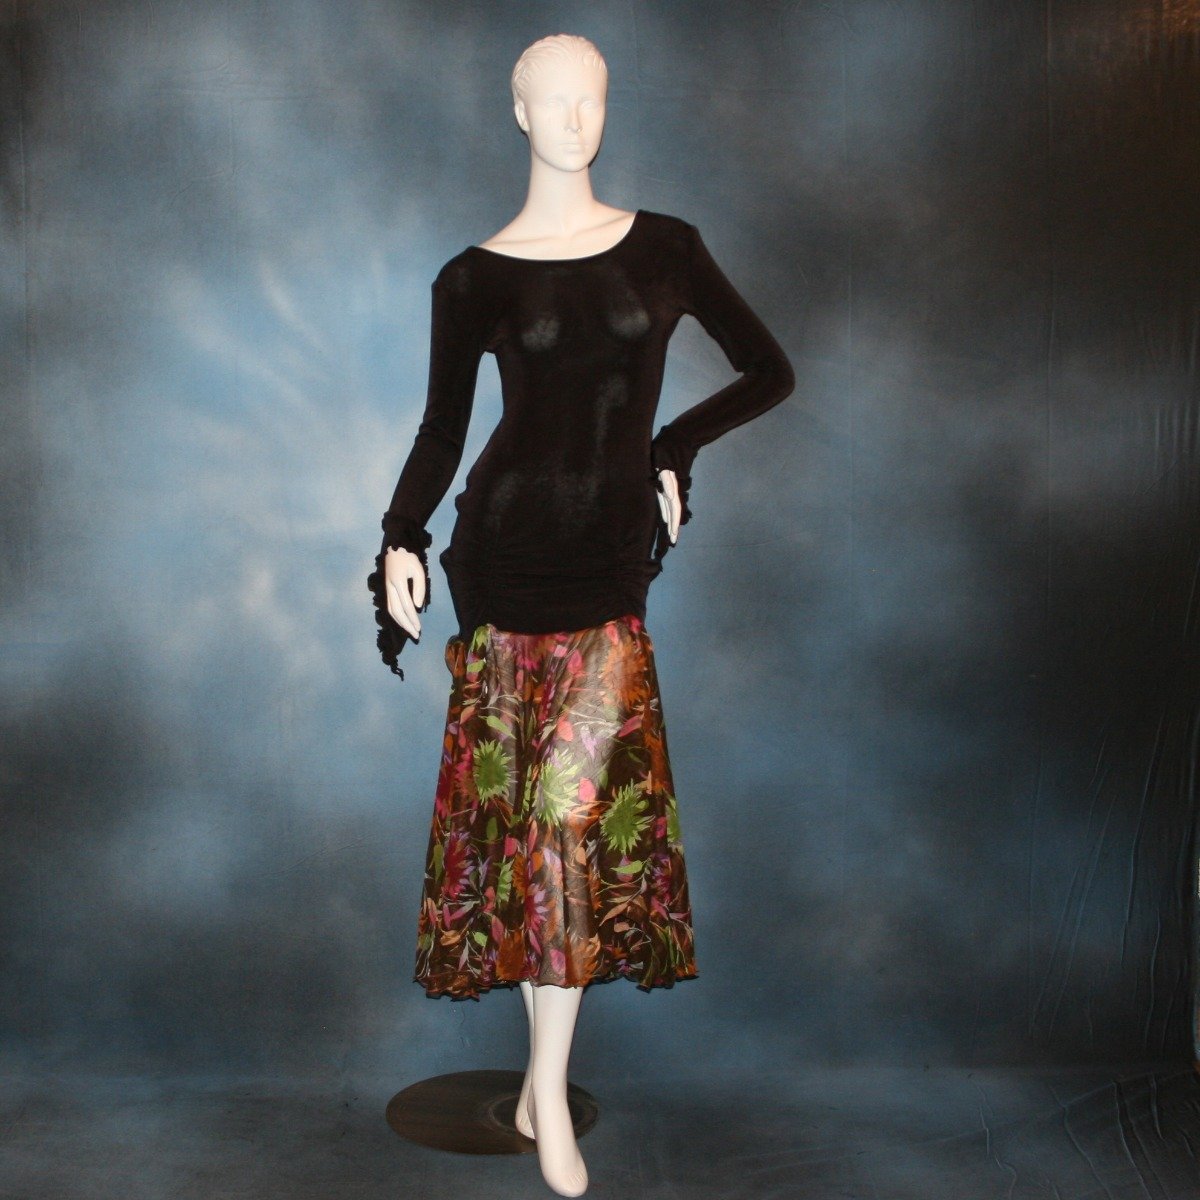 Crystal's Creations Deep chocolate brown social ballroom dress created of luxurious deep chocolate brown solid slinky base featuring ruching through the hip area, & interesting long flared sleeves, with yards of fall colored flowers chiffon petal panels